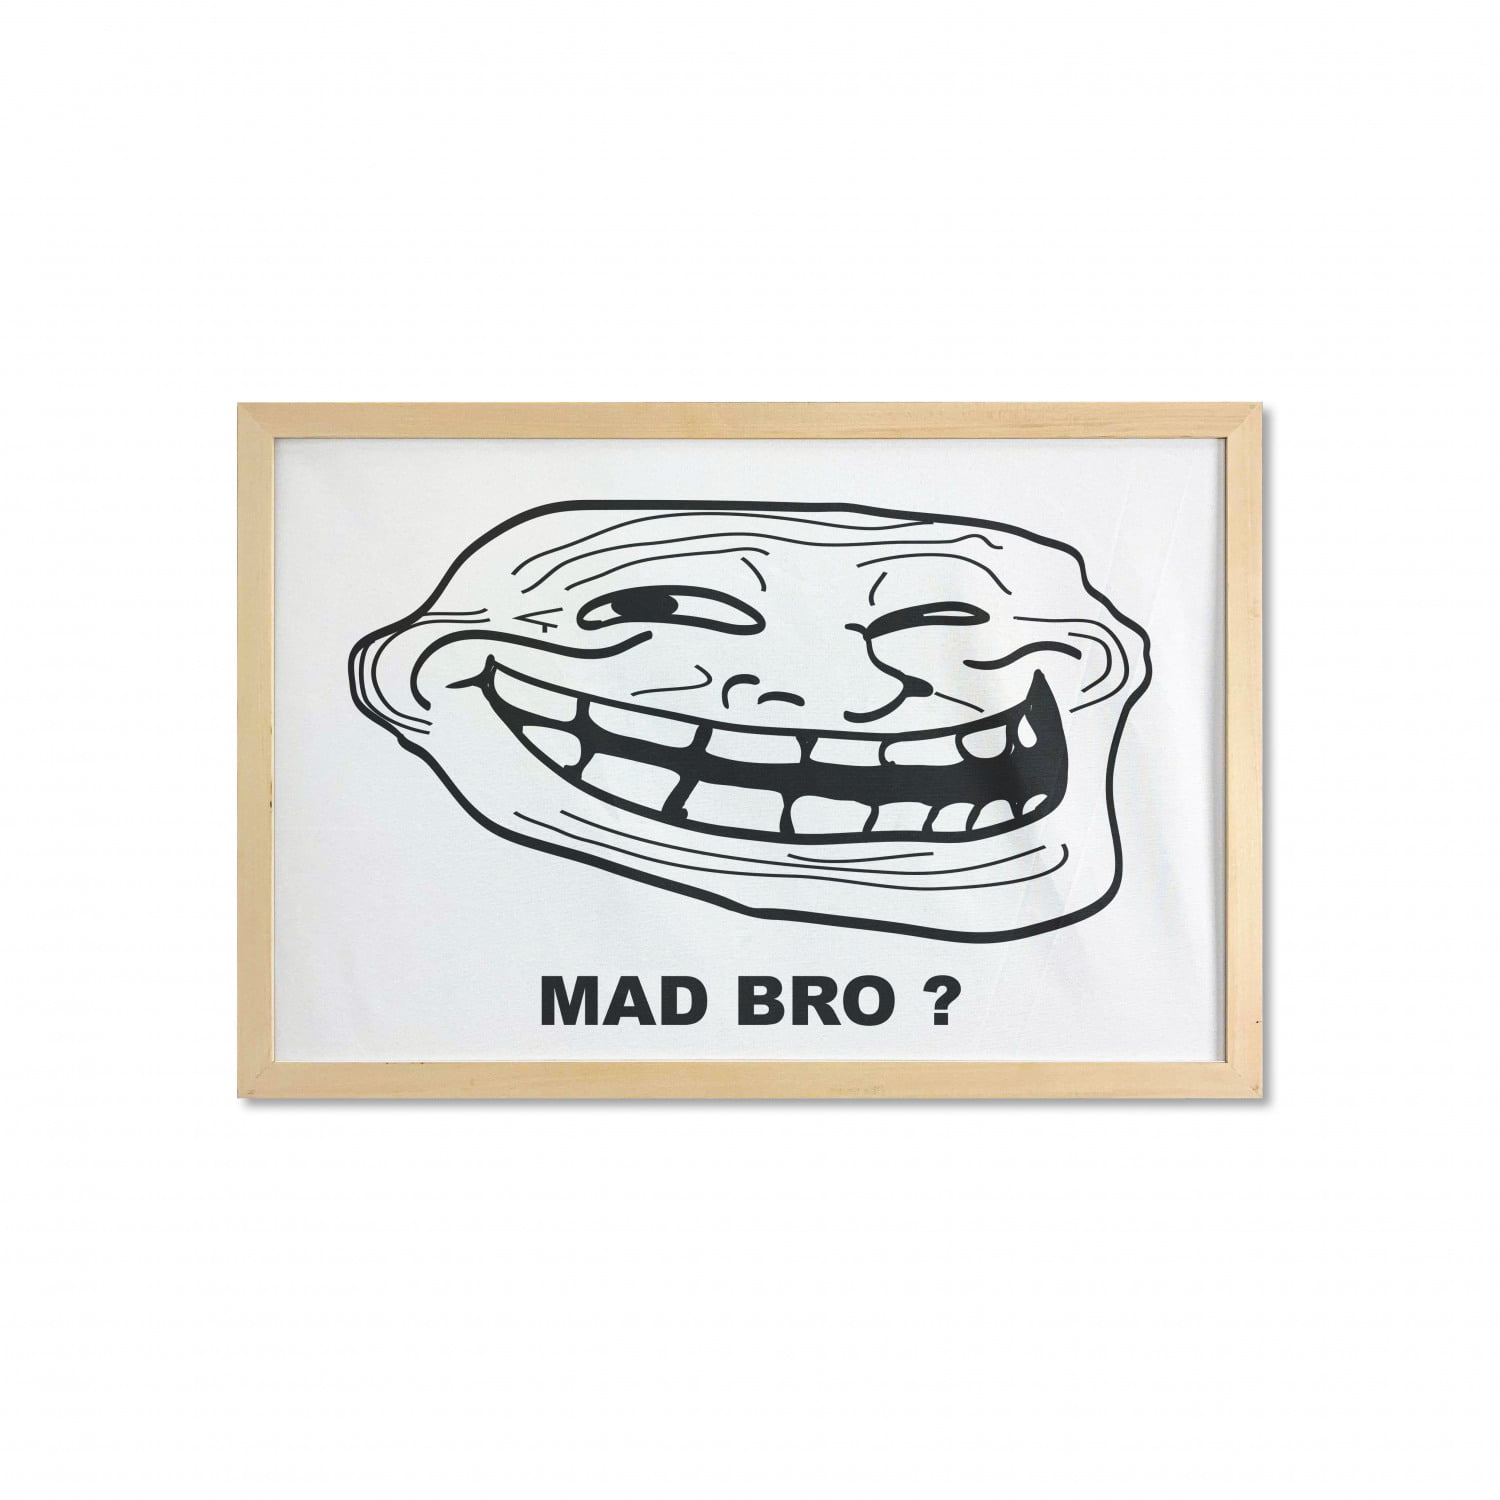 Trollface Posters for Sale